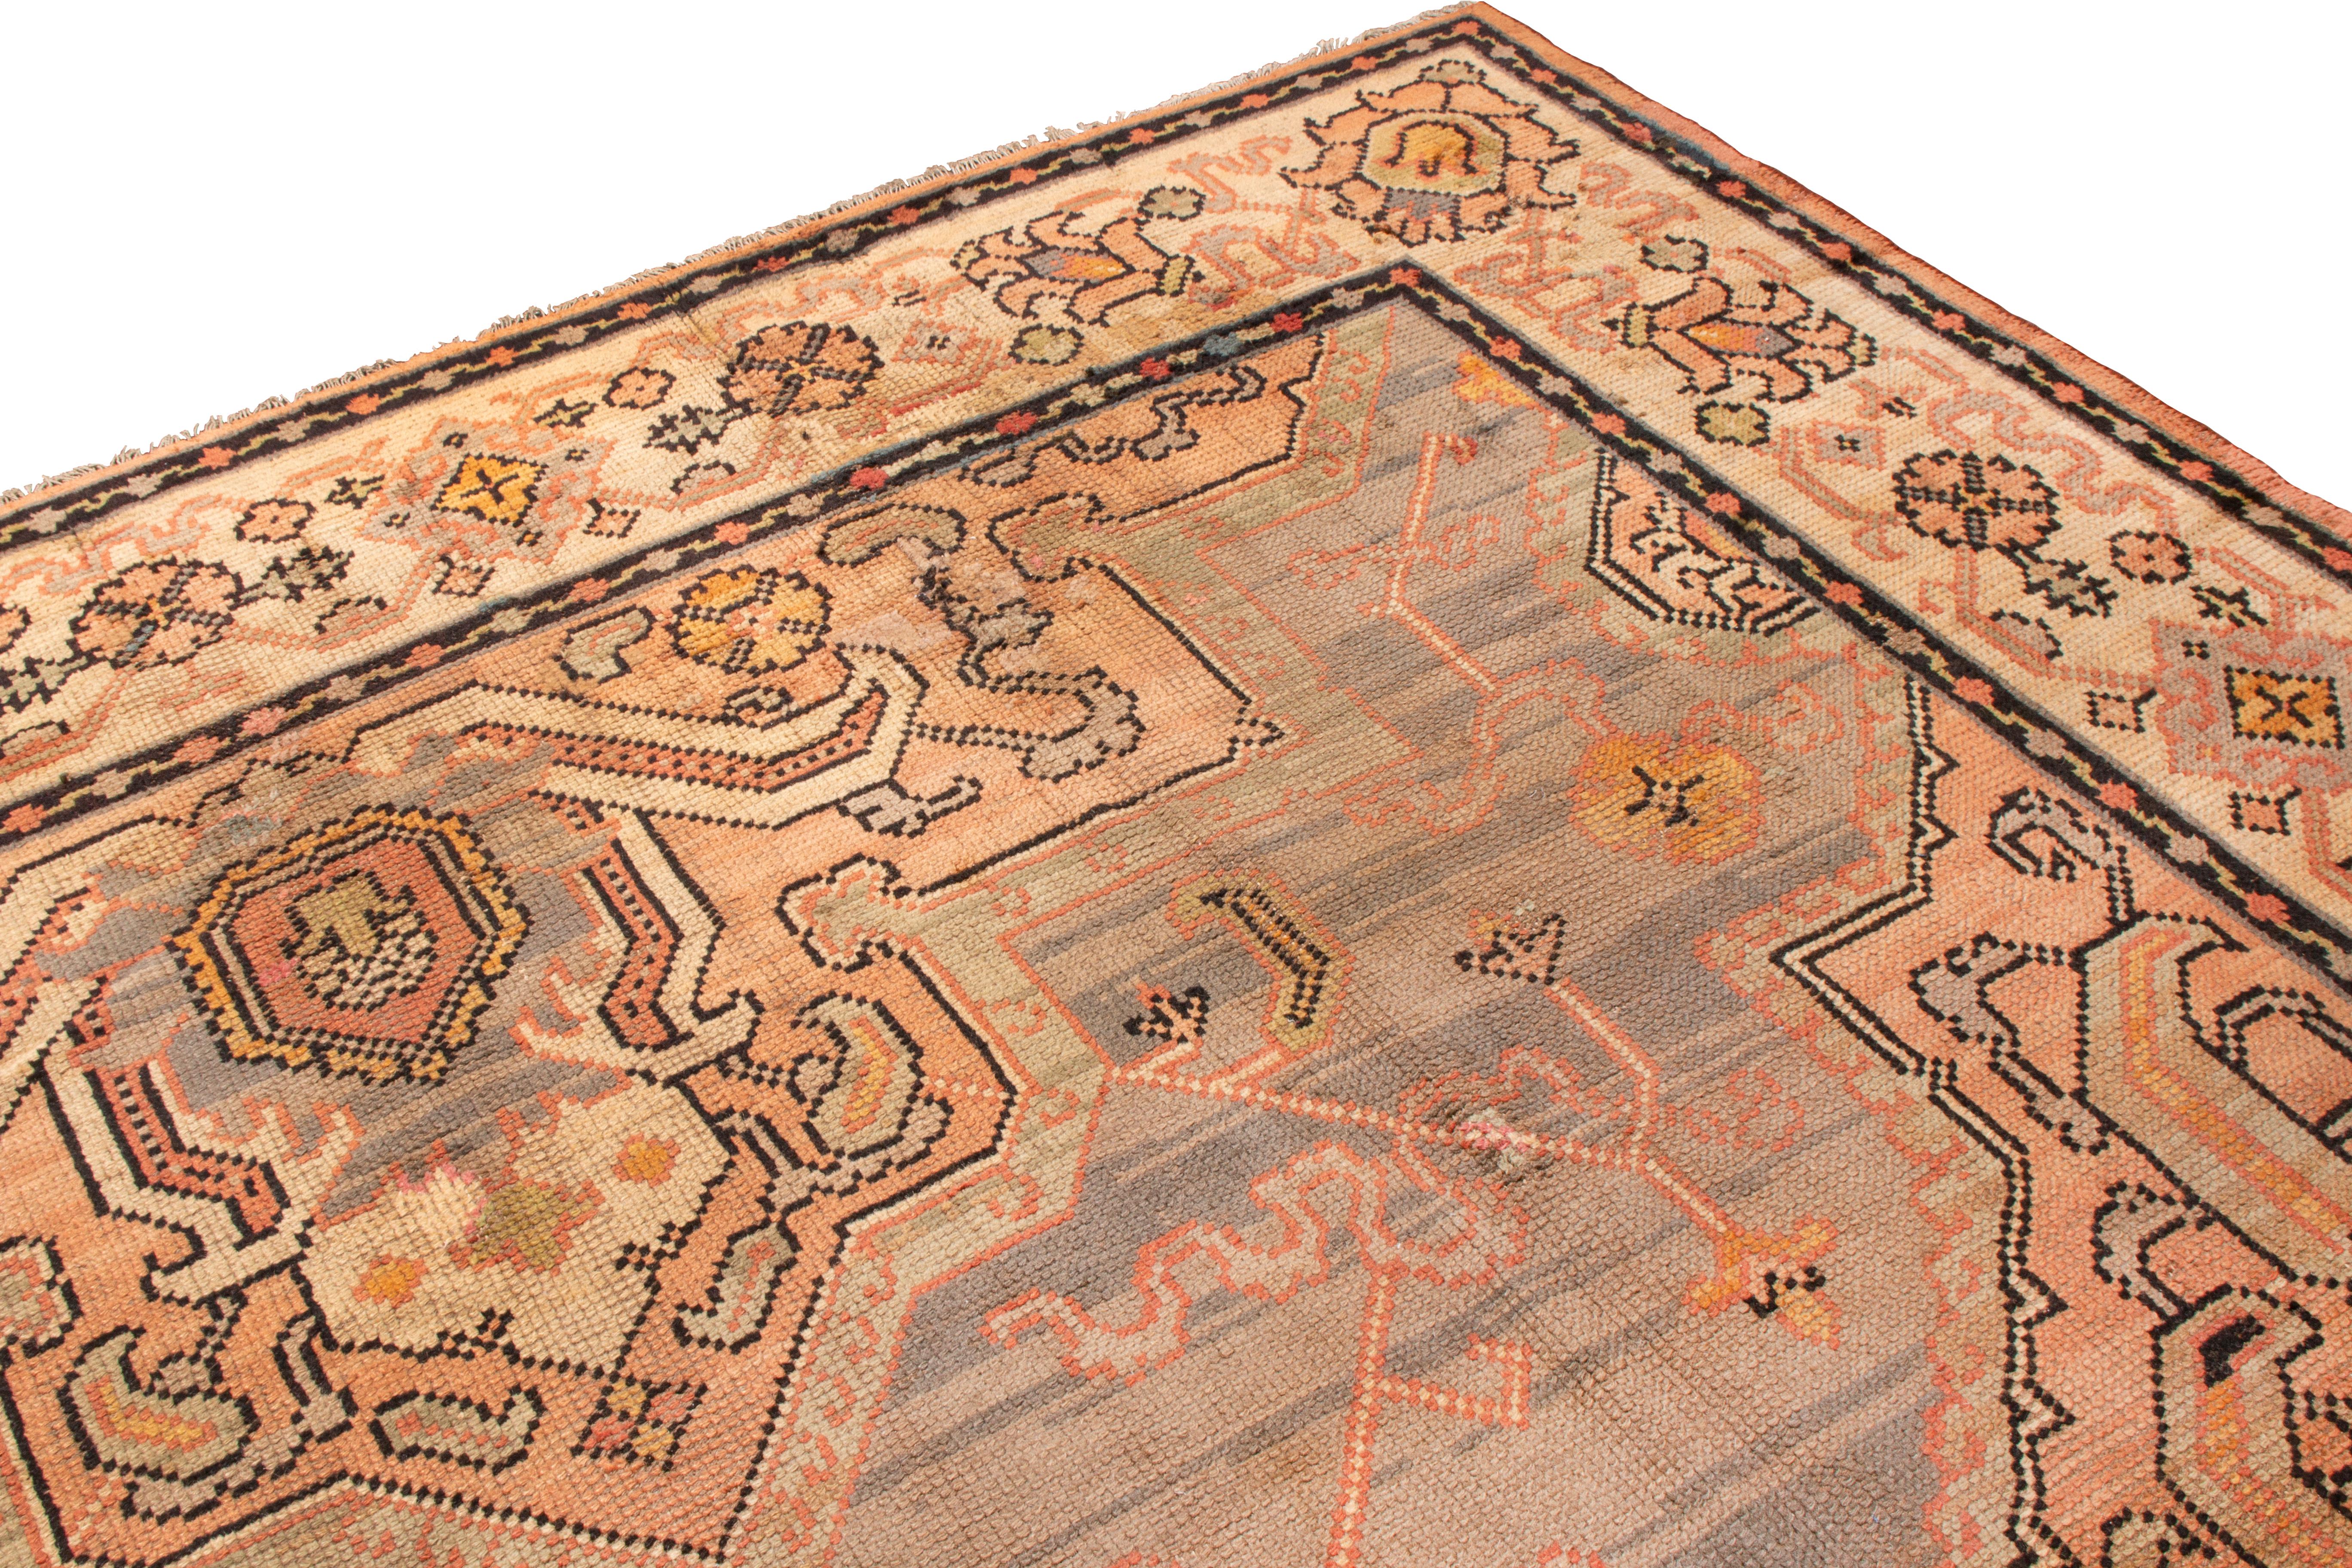 This is a traditional medallion rug that is timeless and charming. The ornate medallion is the center of attention in a muted palette of blue, orange, gold, cream and black. The continuous border creates a beautiful flow. Hand knotted in fine wool.